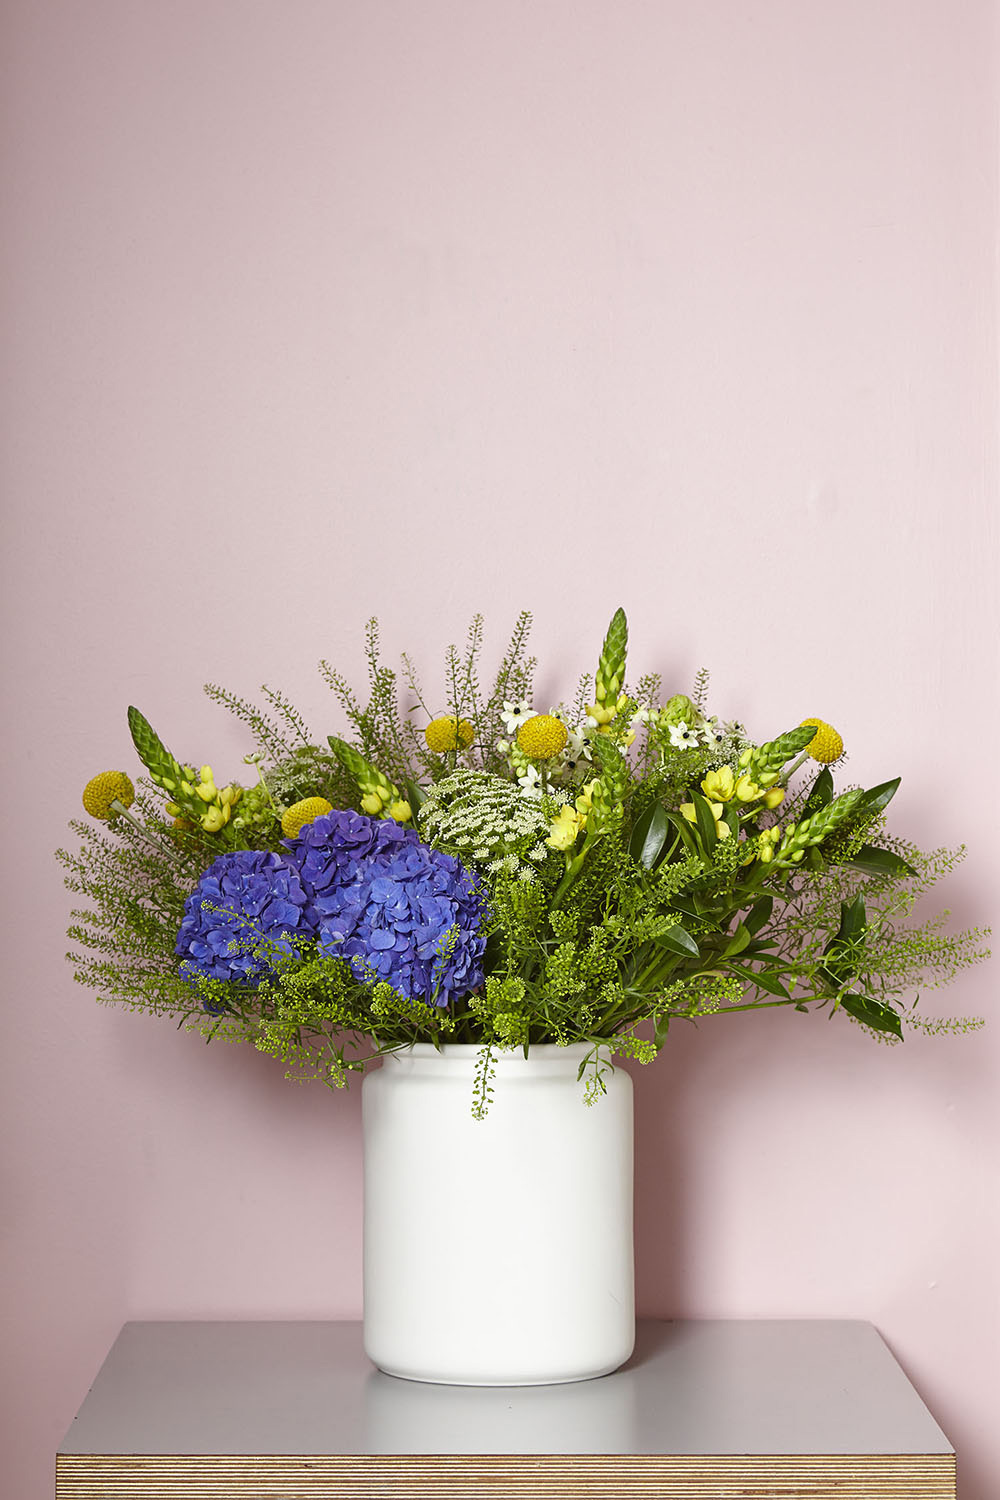 Flowers in vase on grey table with pink wall.